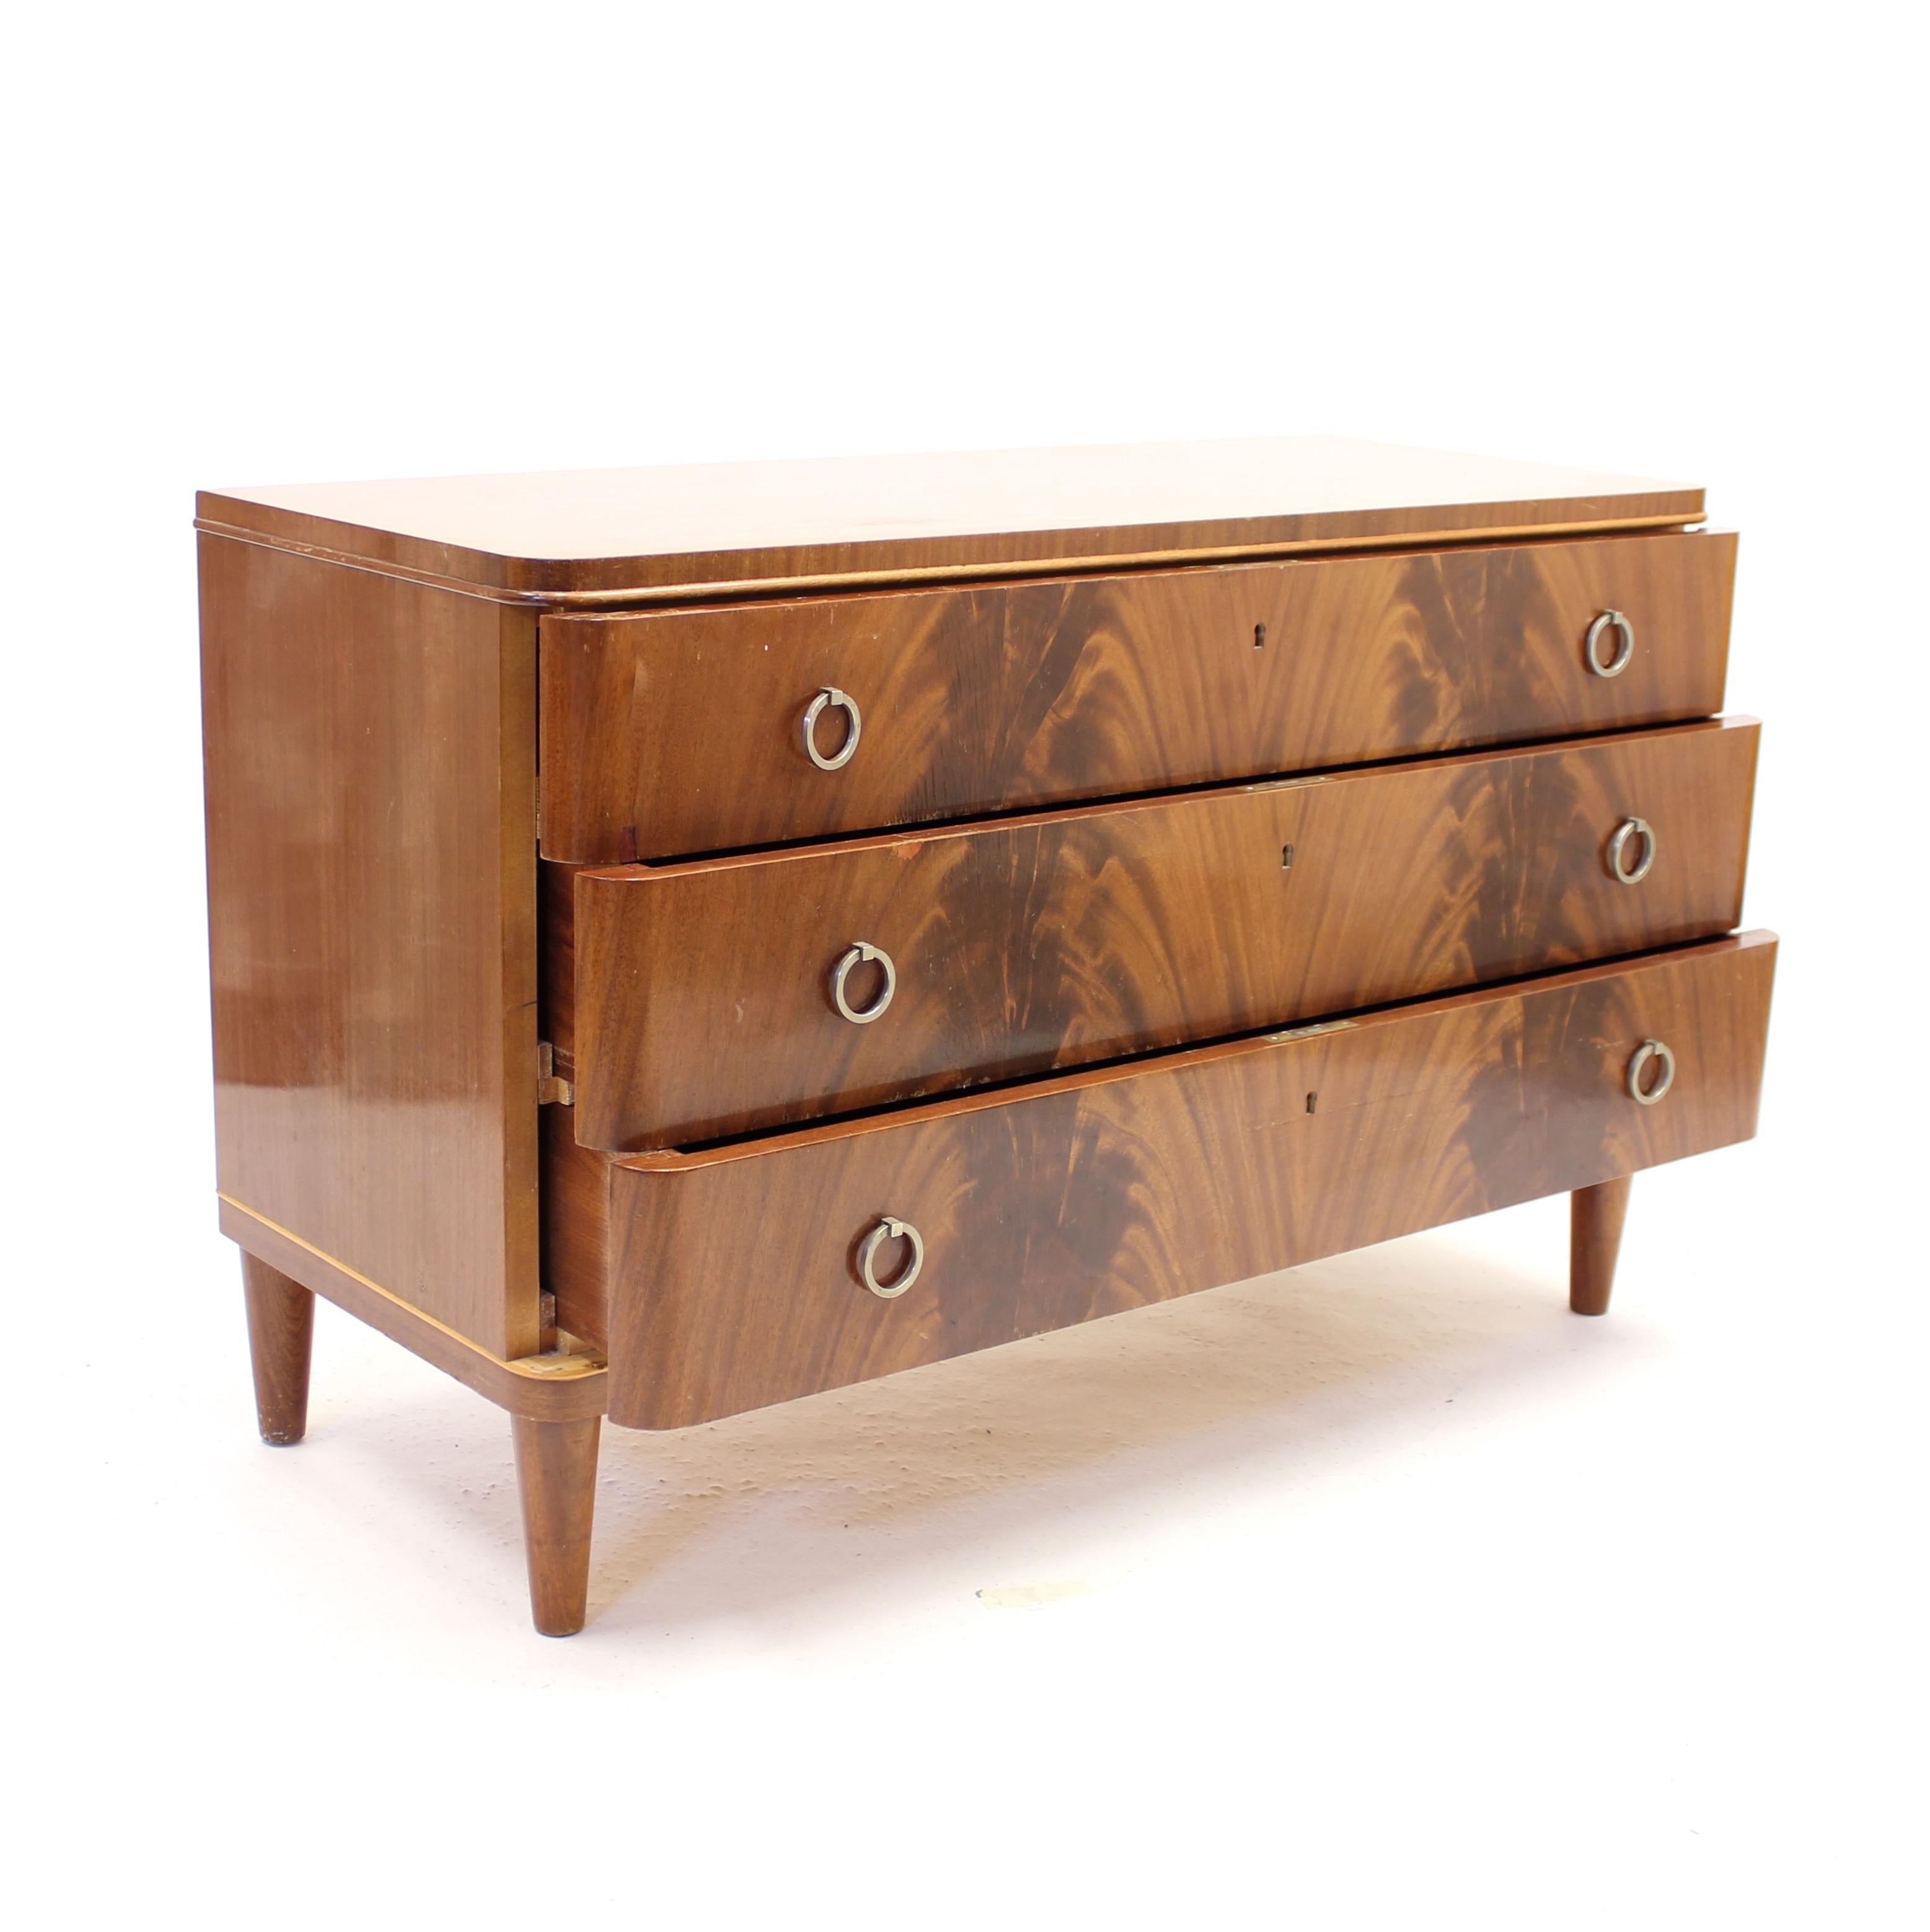 Swedish Modern Pyramid Mahogany Chest of Drawers, ca 1940s For Sale 1